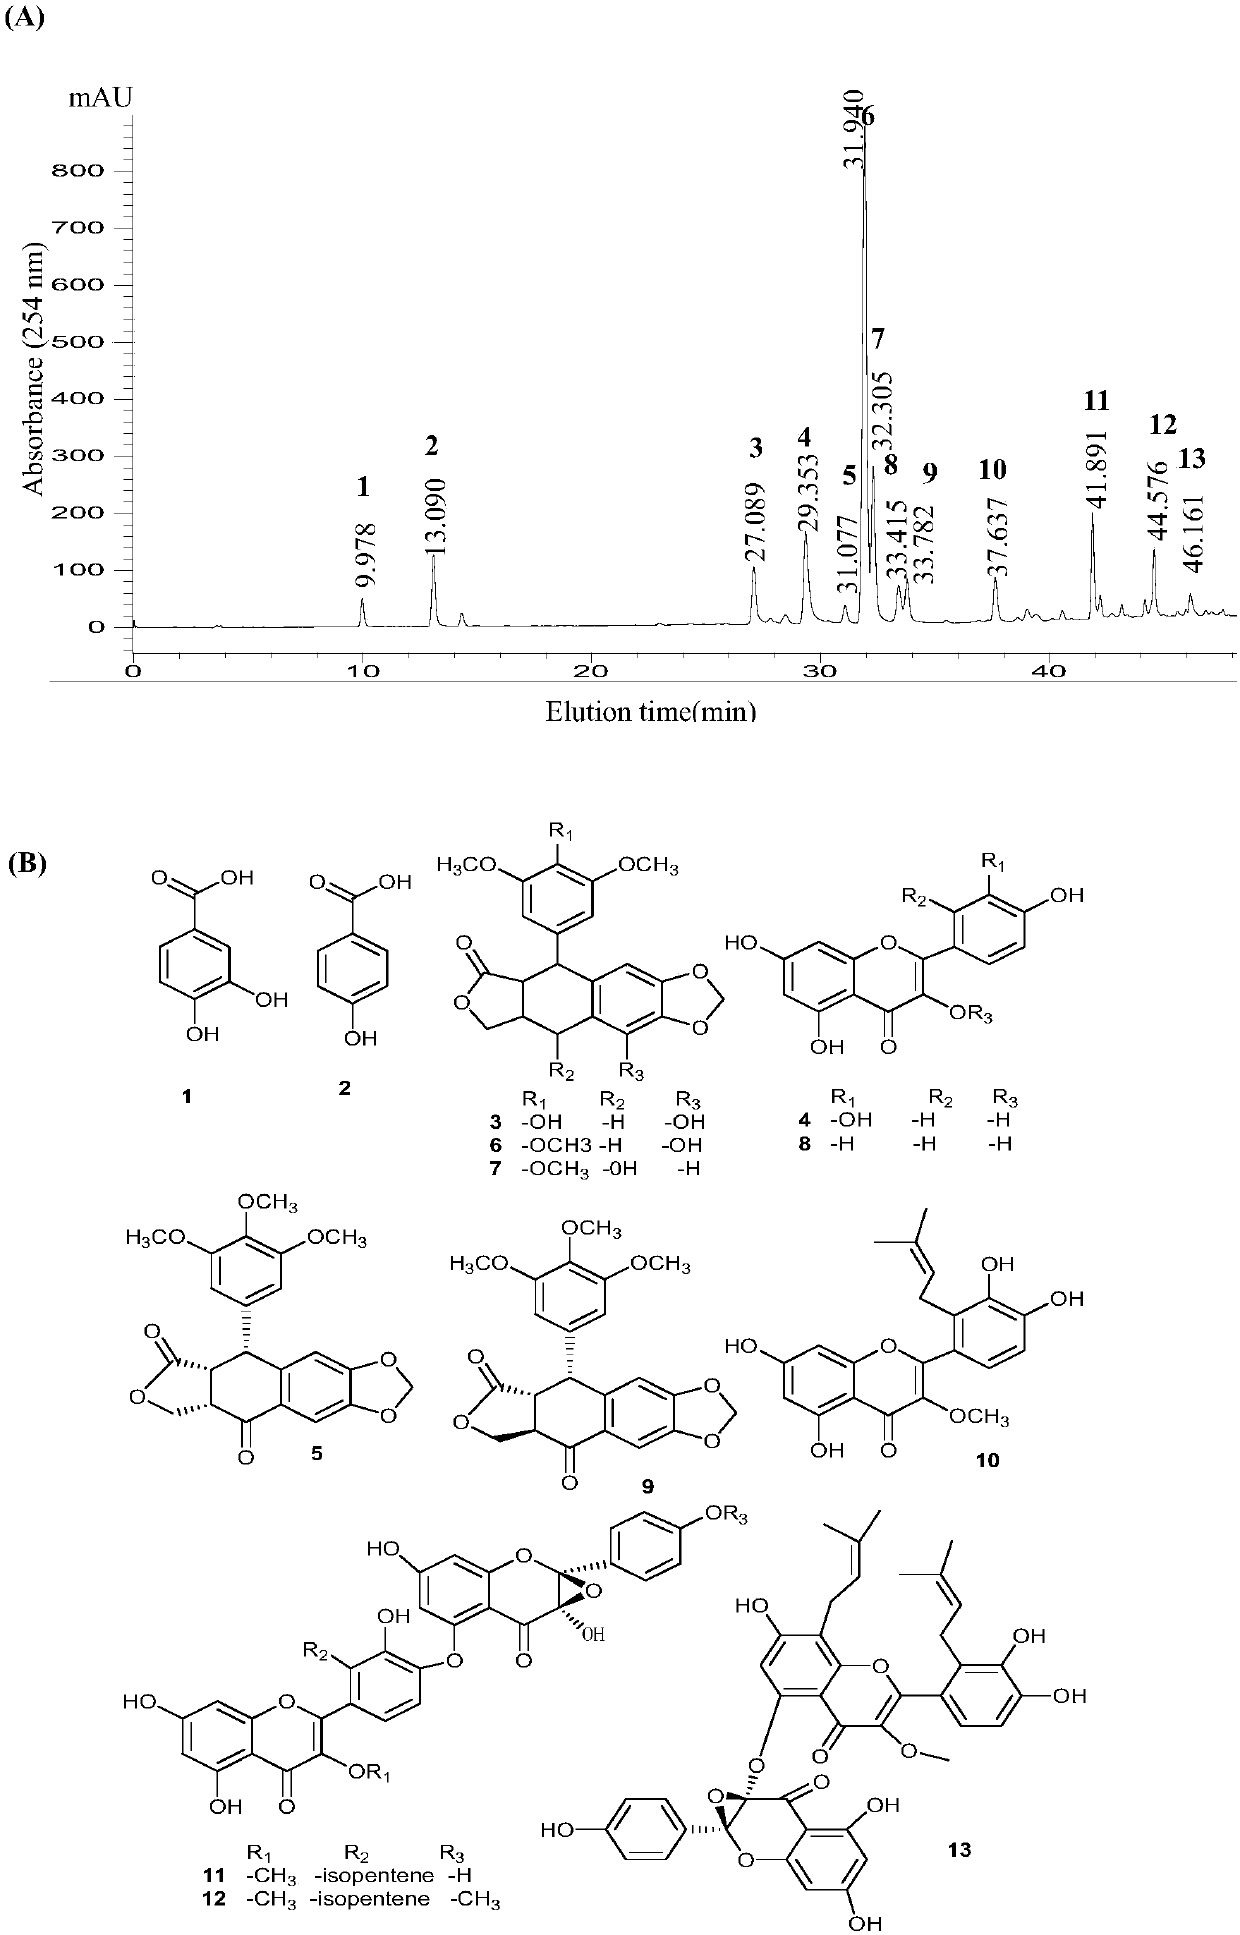 A method for preparing podophyllotoxin, star anise lotus biflavone and their analogs